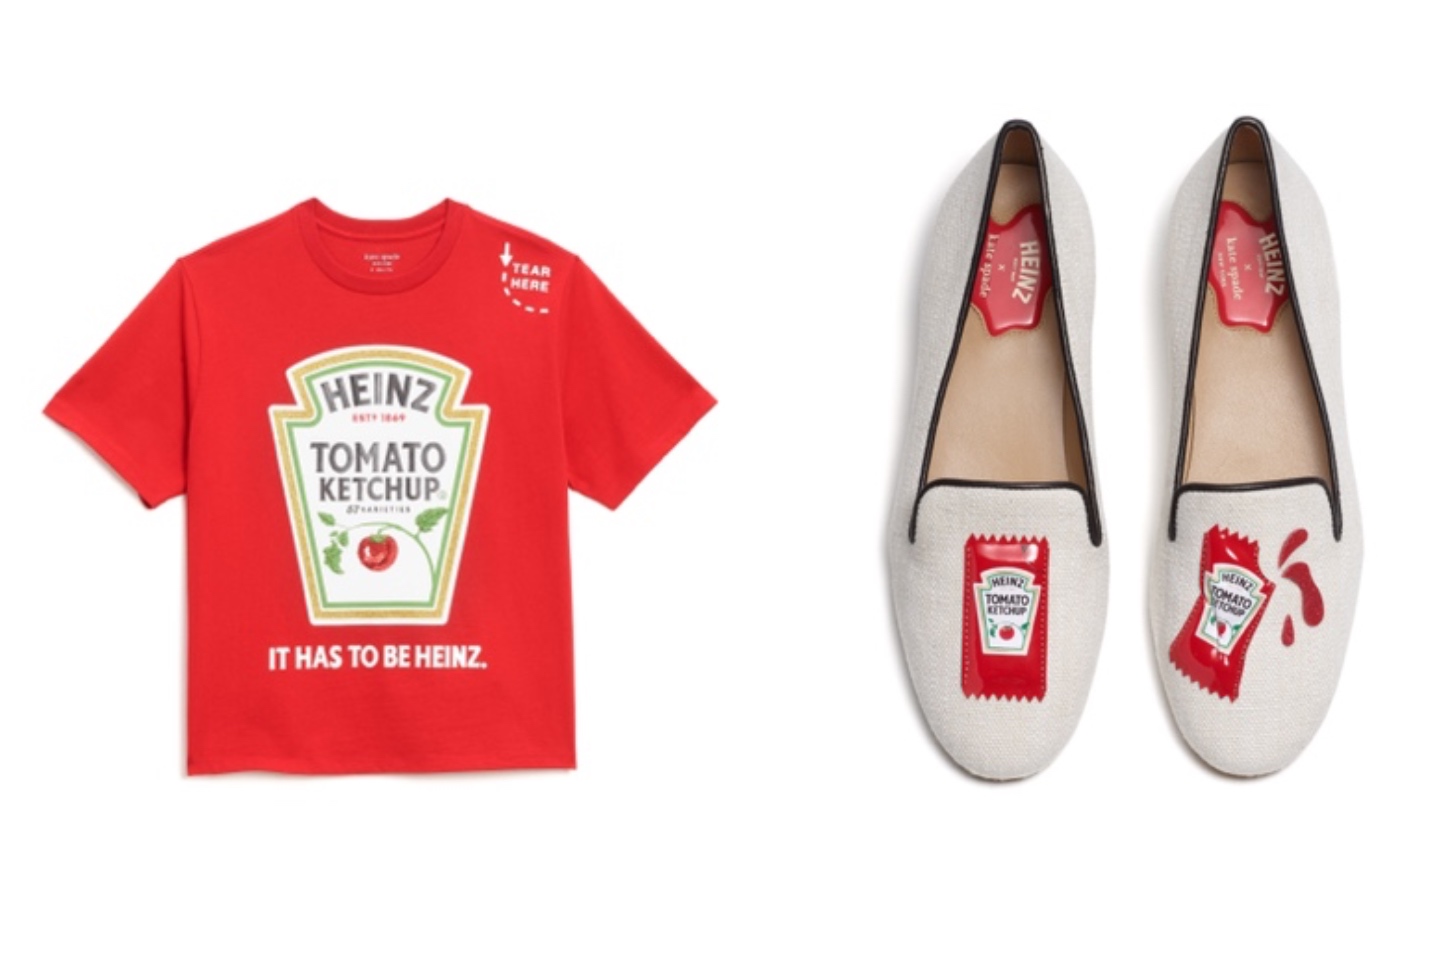 , Kate Spade New York and Heinz introduce saucy pre-fall collection with ketchup-themed accessories